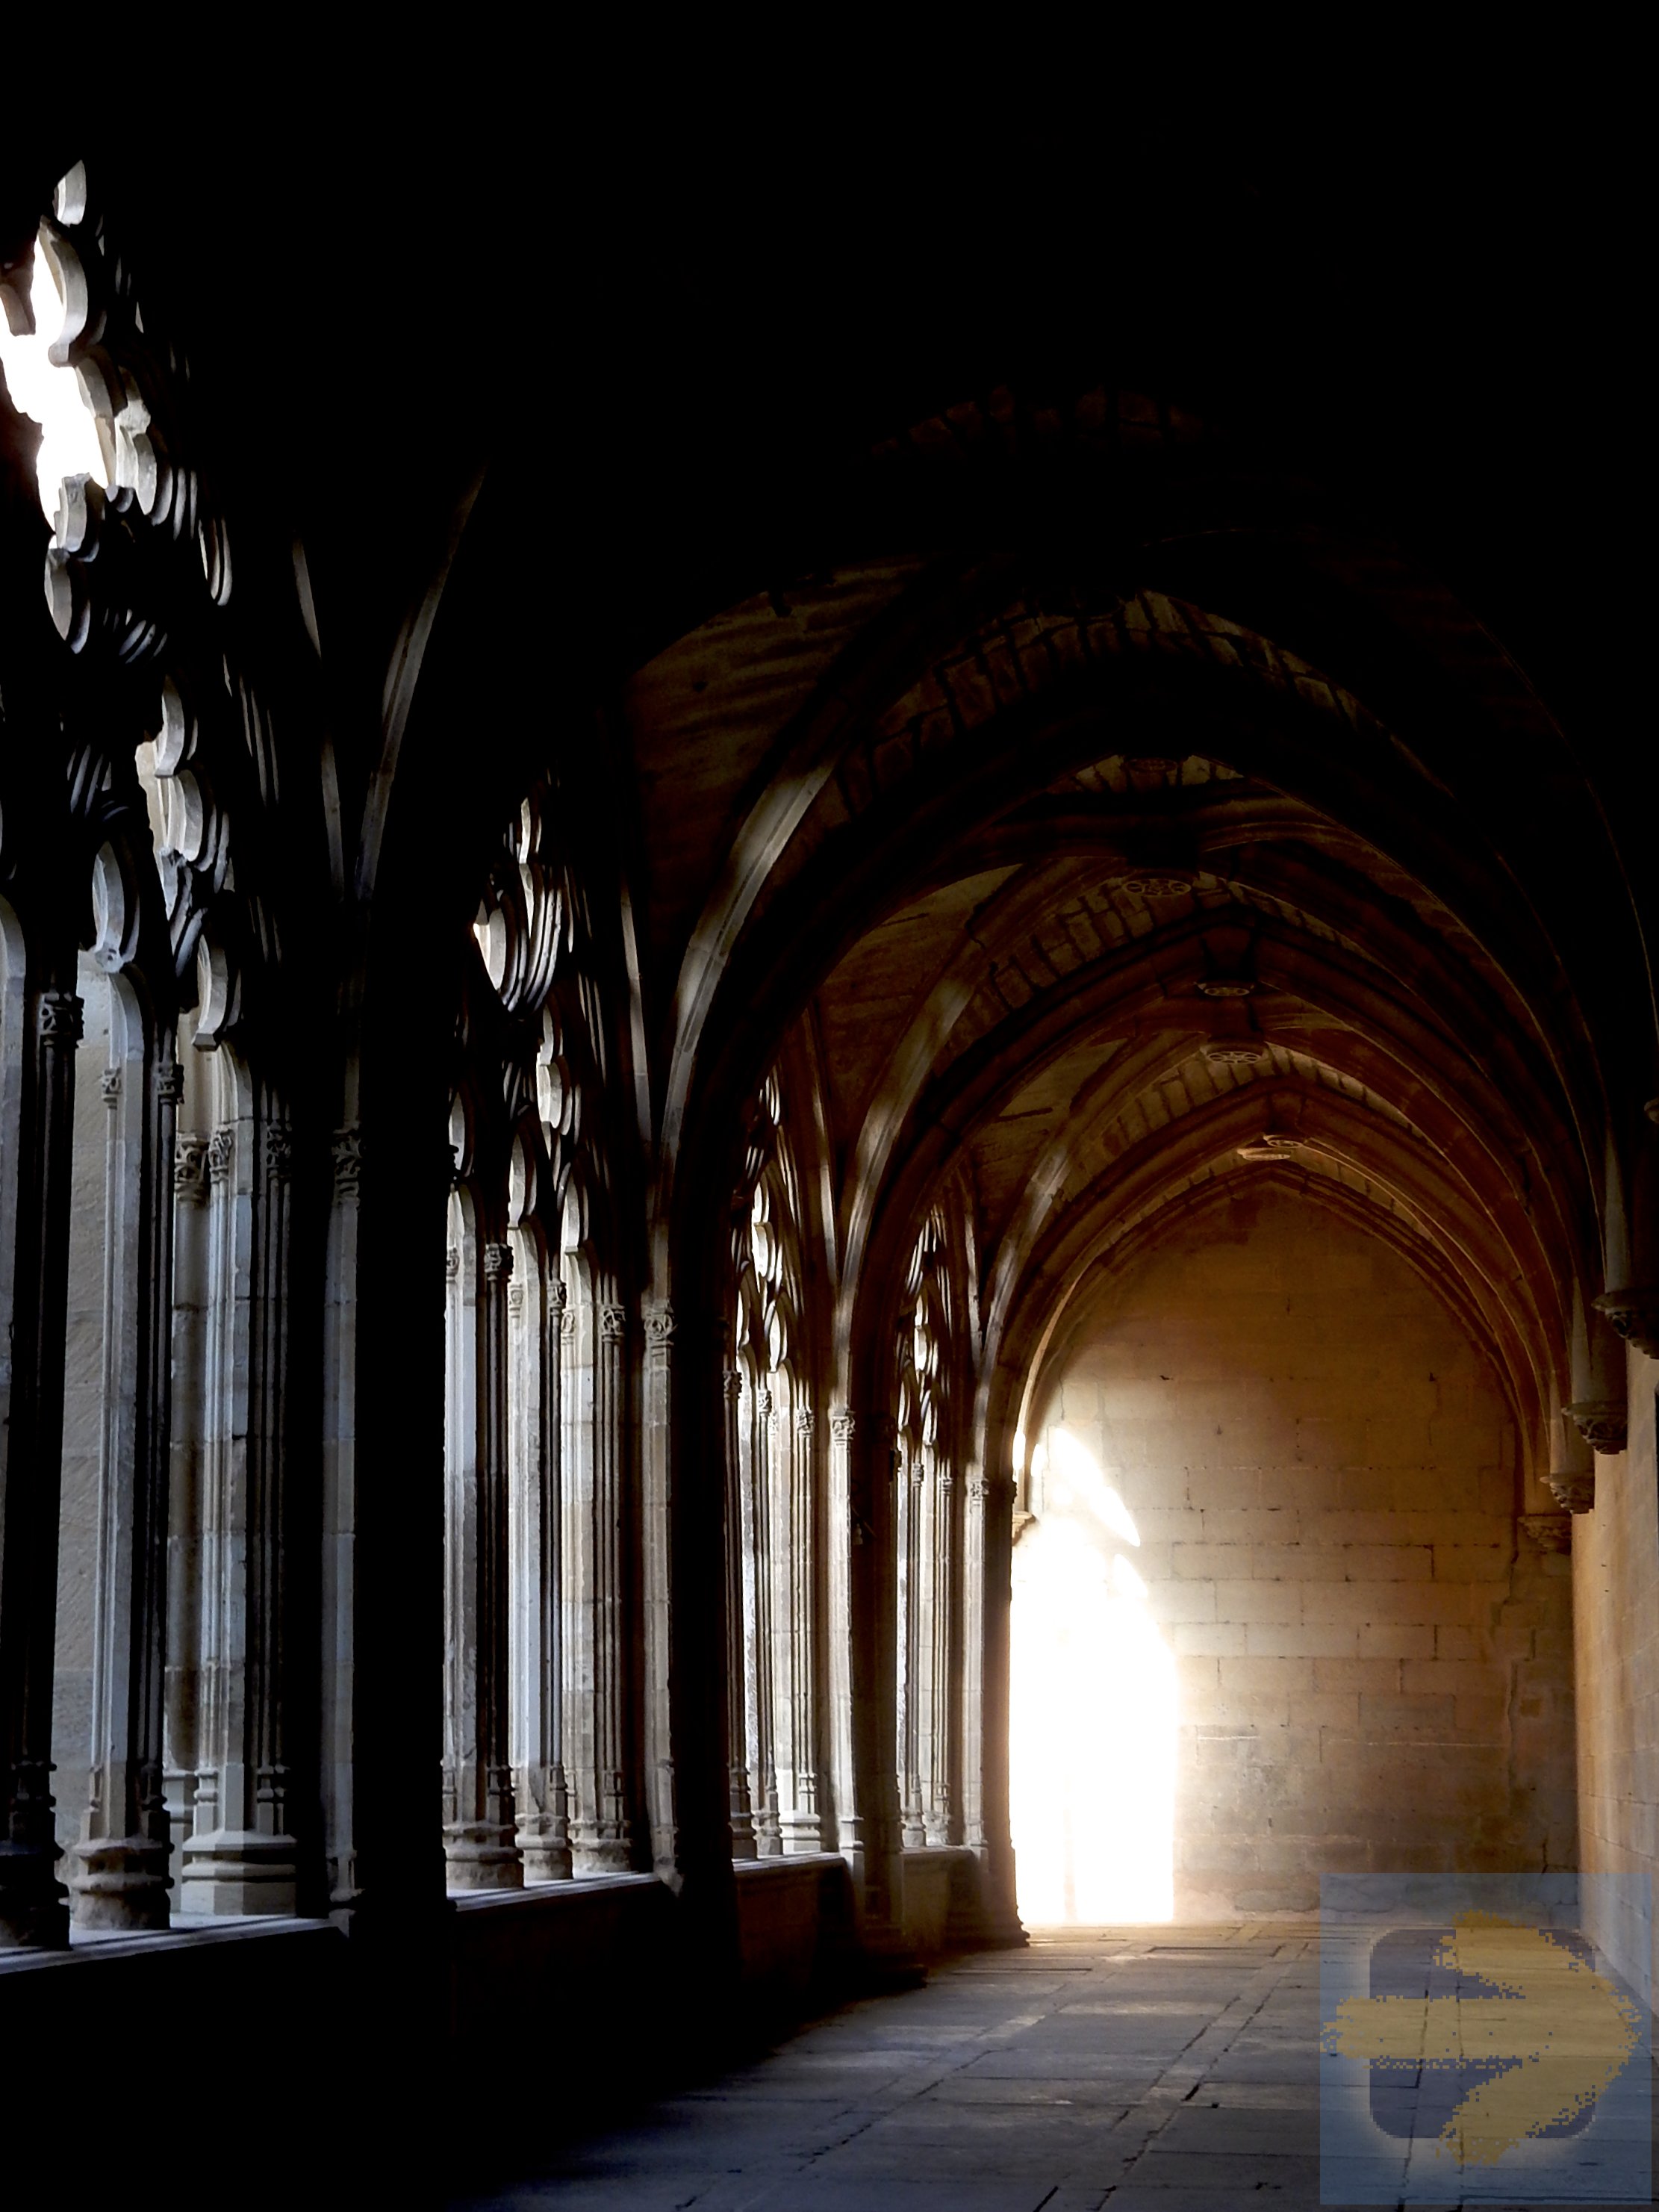 The cloister in Los Arcos